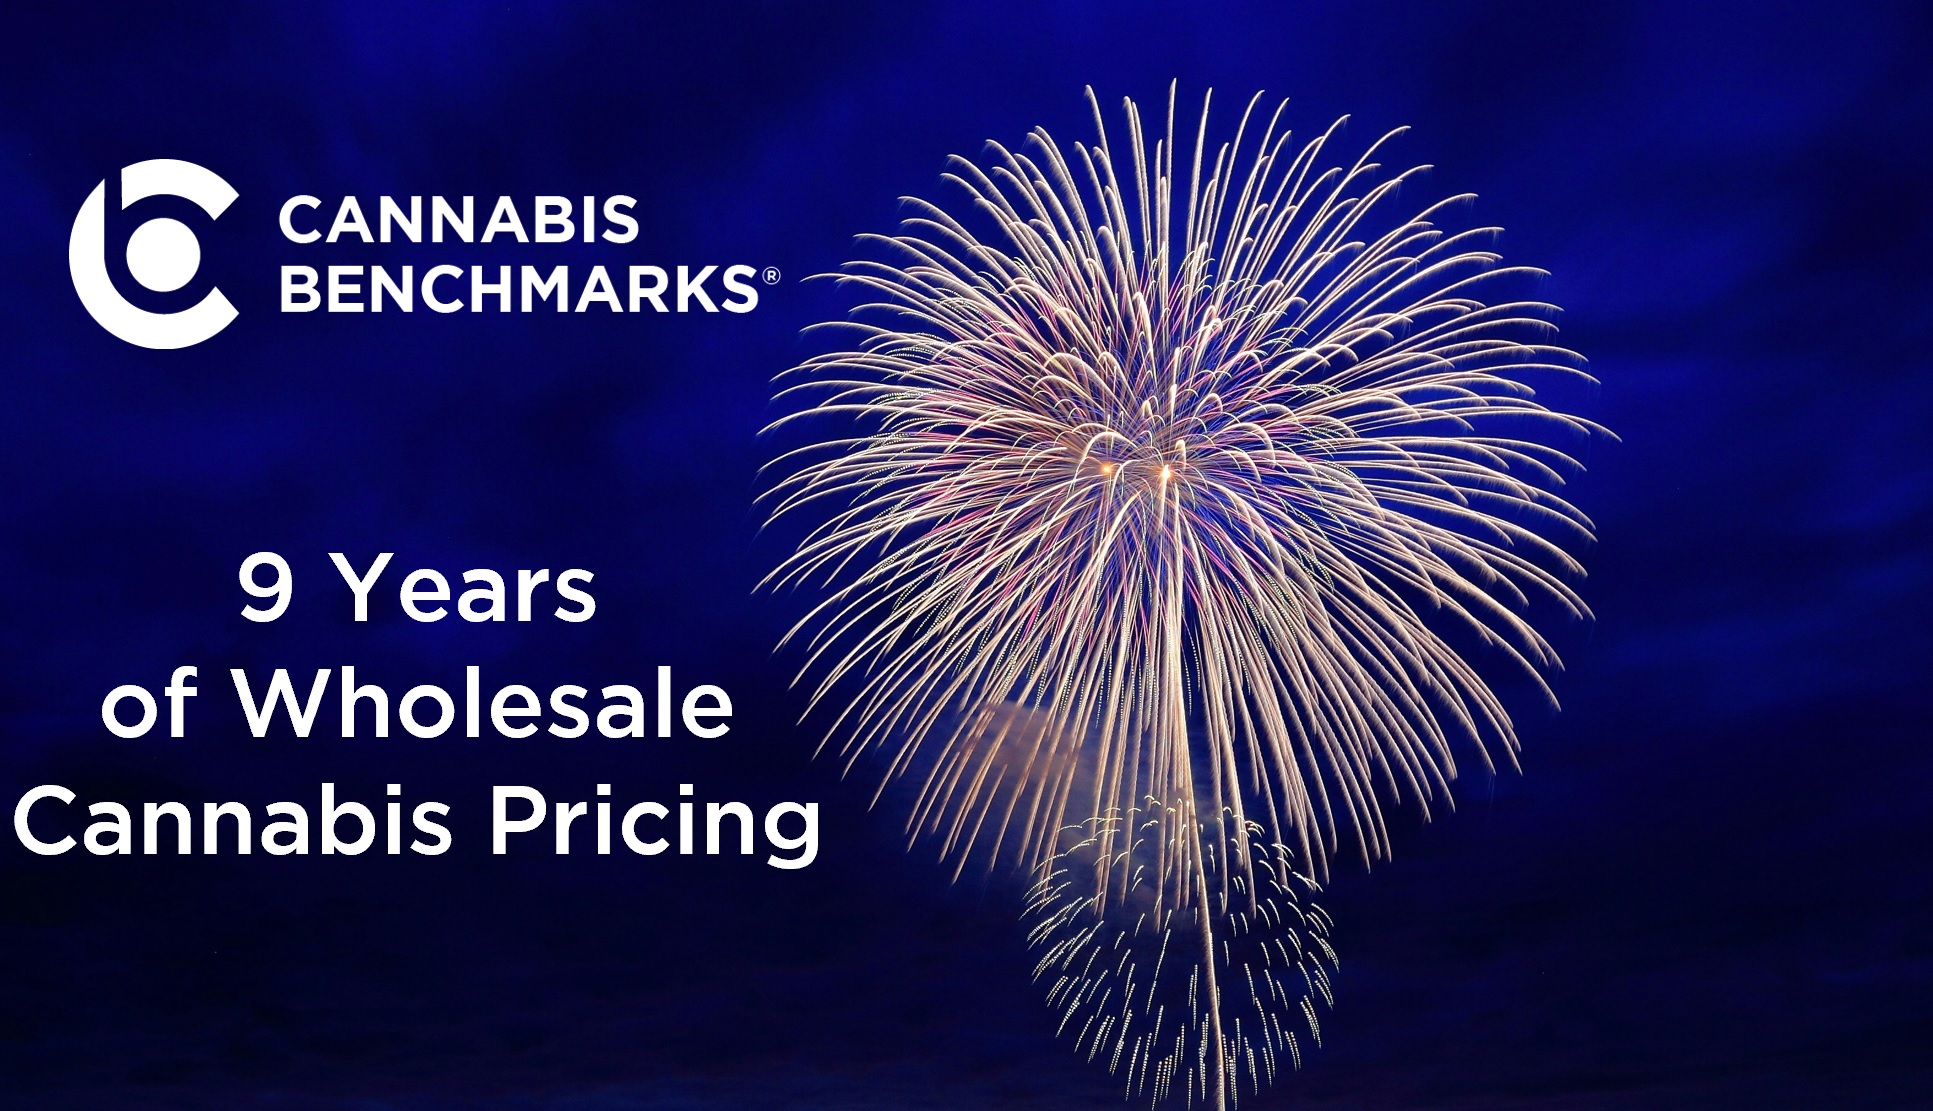 9 Years of Cannabis Wholesale Price History